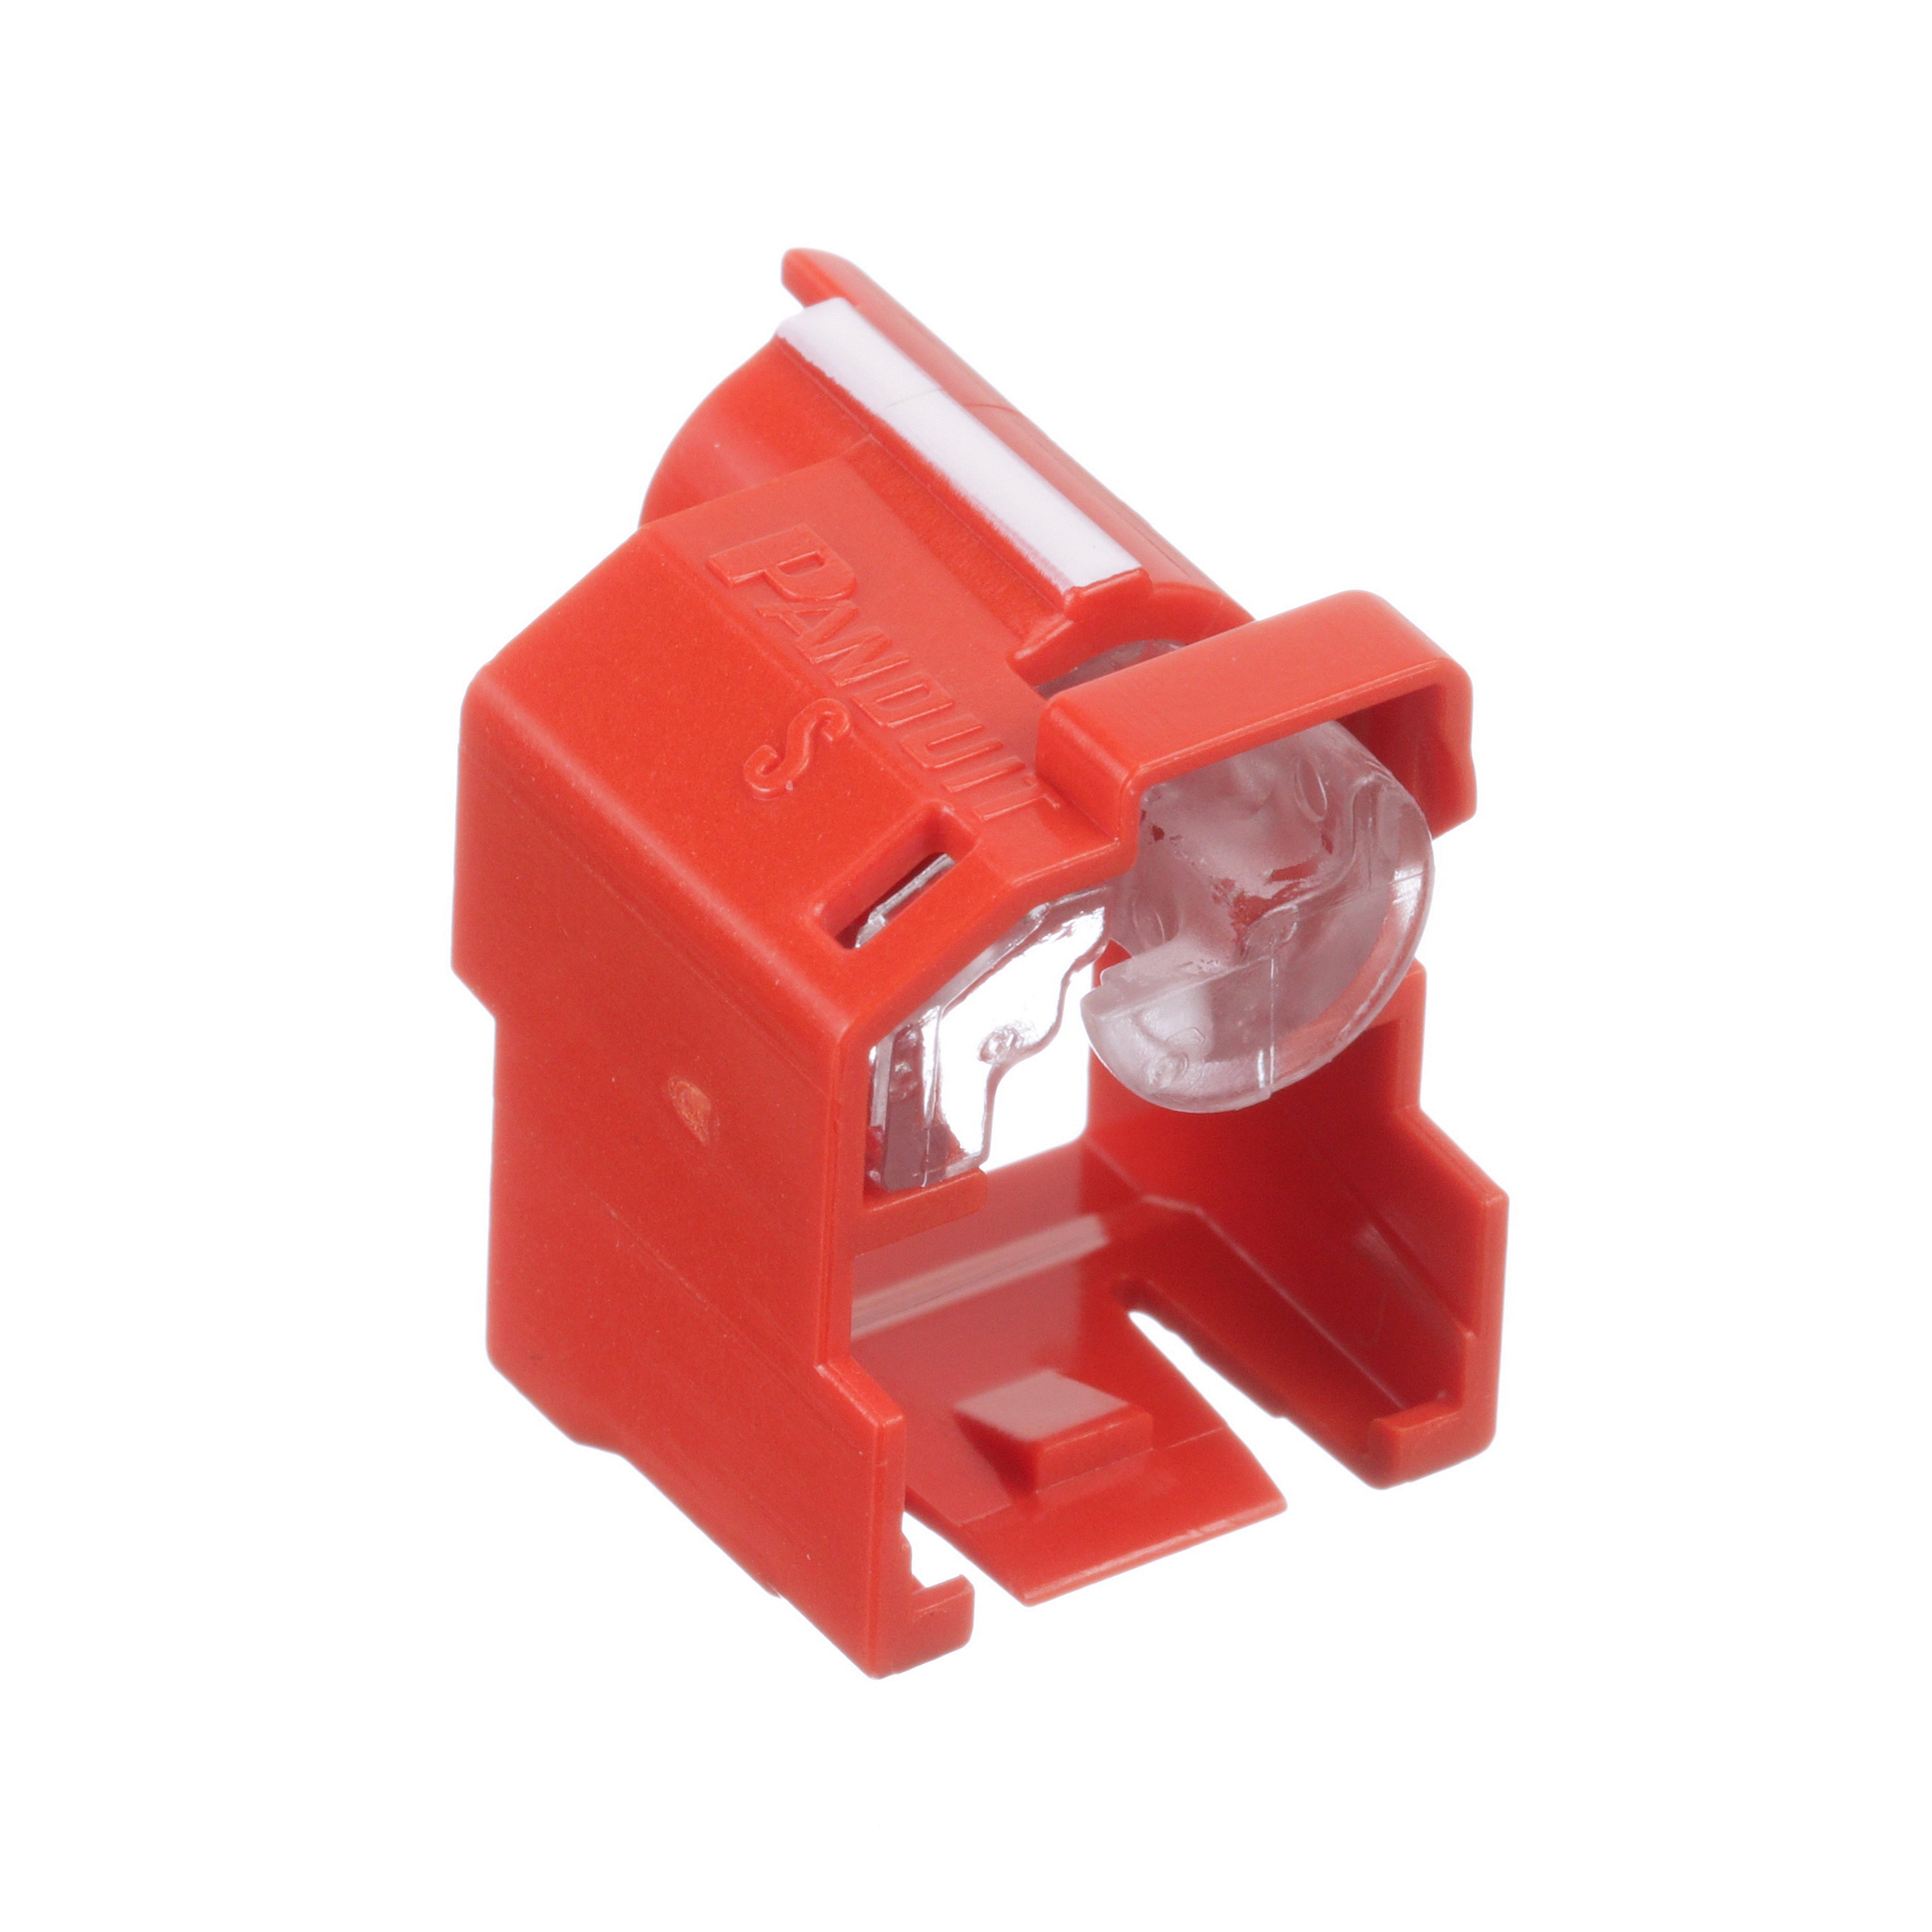 Super recessed RJ45 plug lock-in device with extended hood, 10 devices (red) and